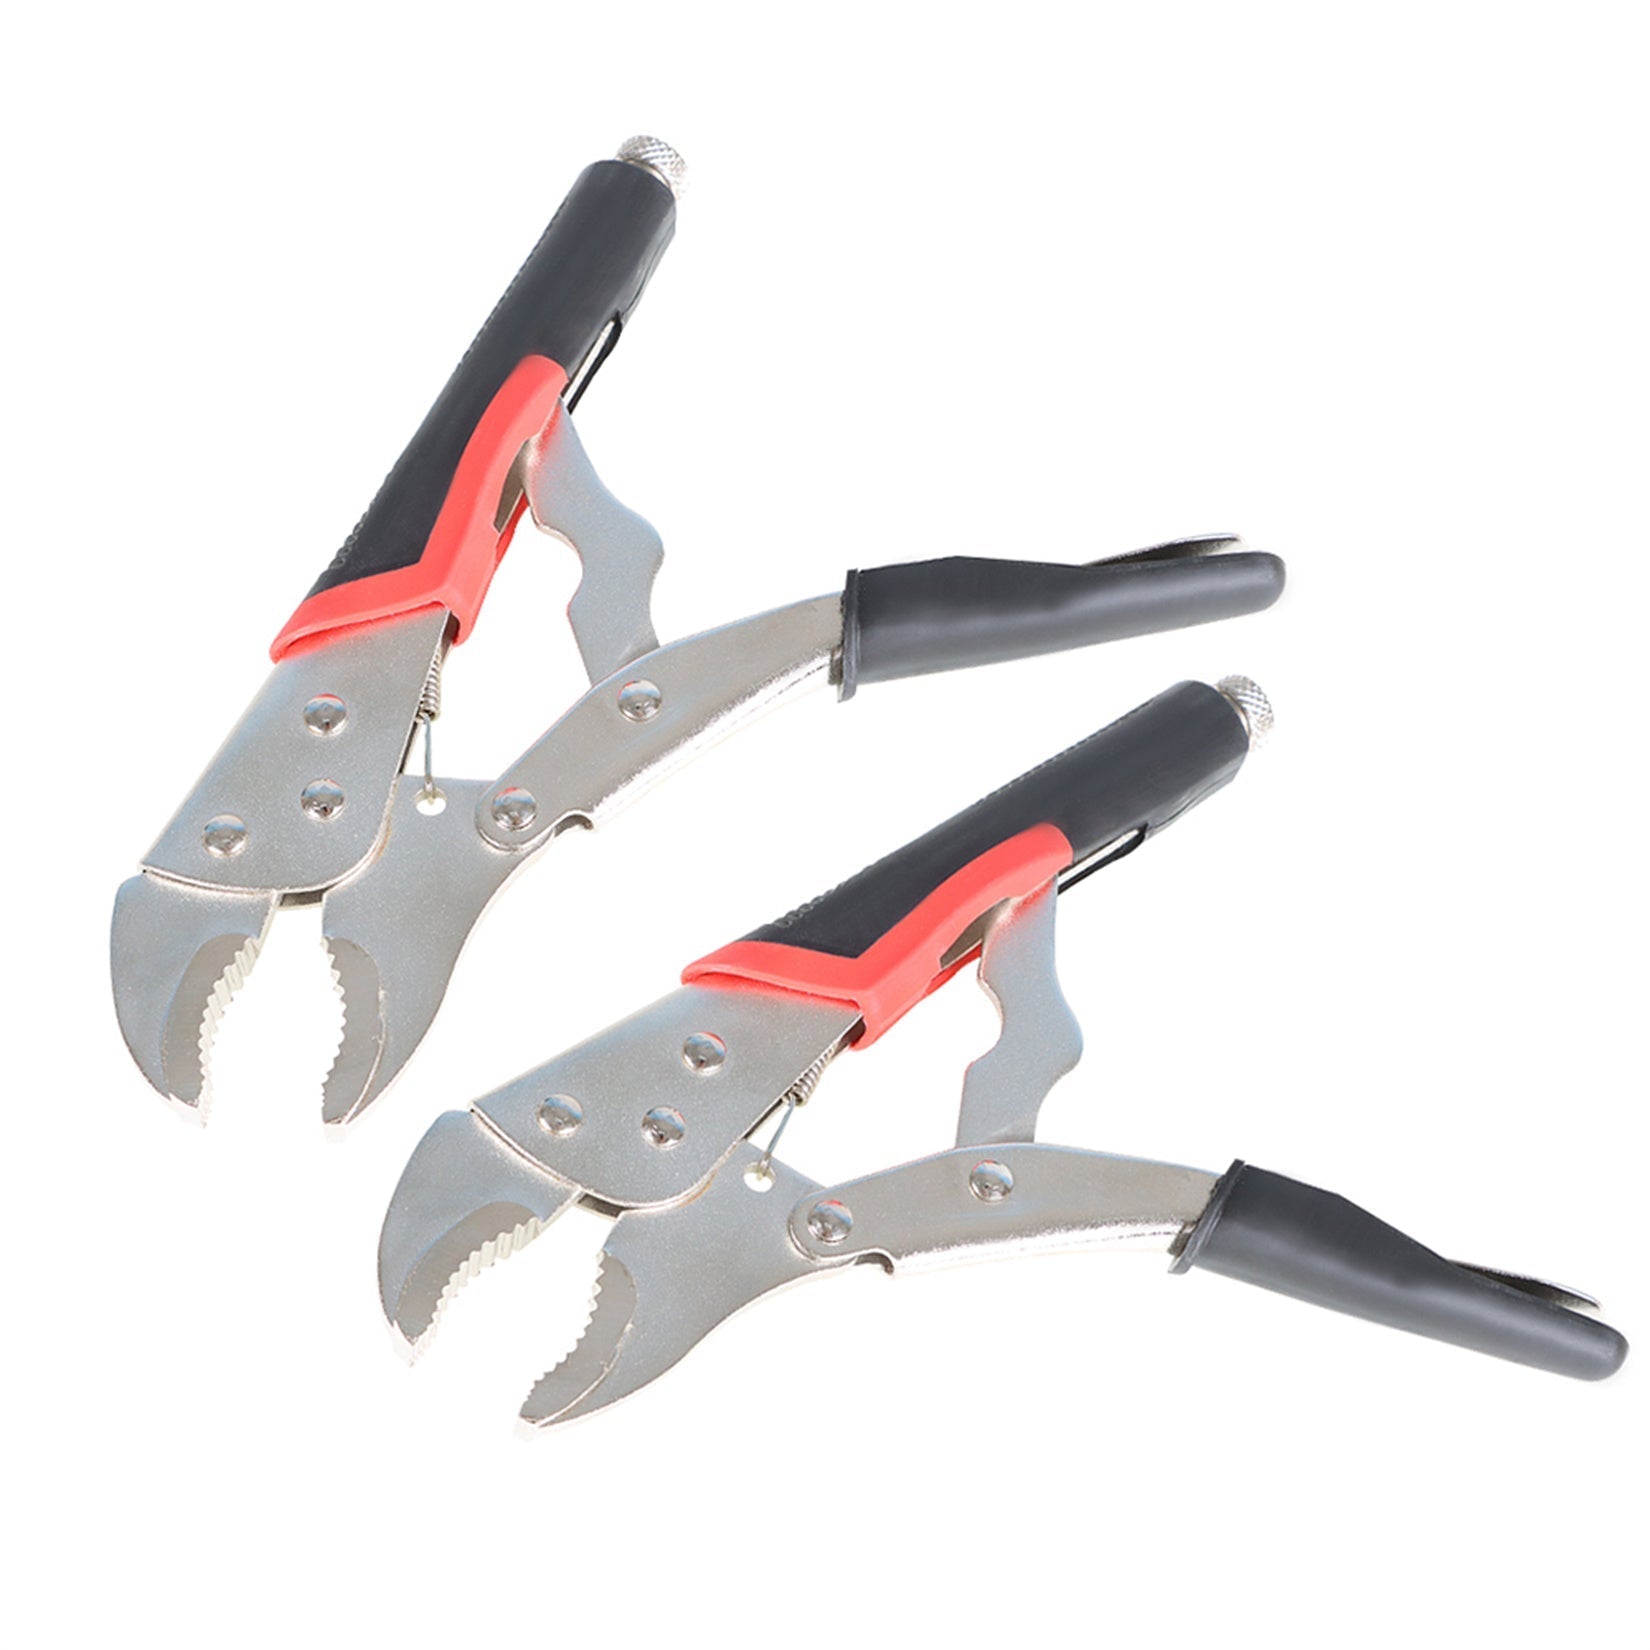 findmall  2Pcs 7 Inch Torque Lock Curved Jaw Locking Plier Set Chrome-vanadium Steel Fast Setup Easy Release for Home Shop Workshop and Automotive Use FINDMALLPARTS